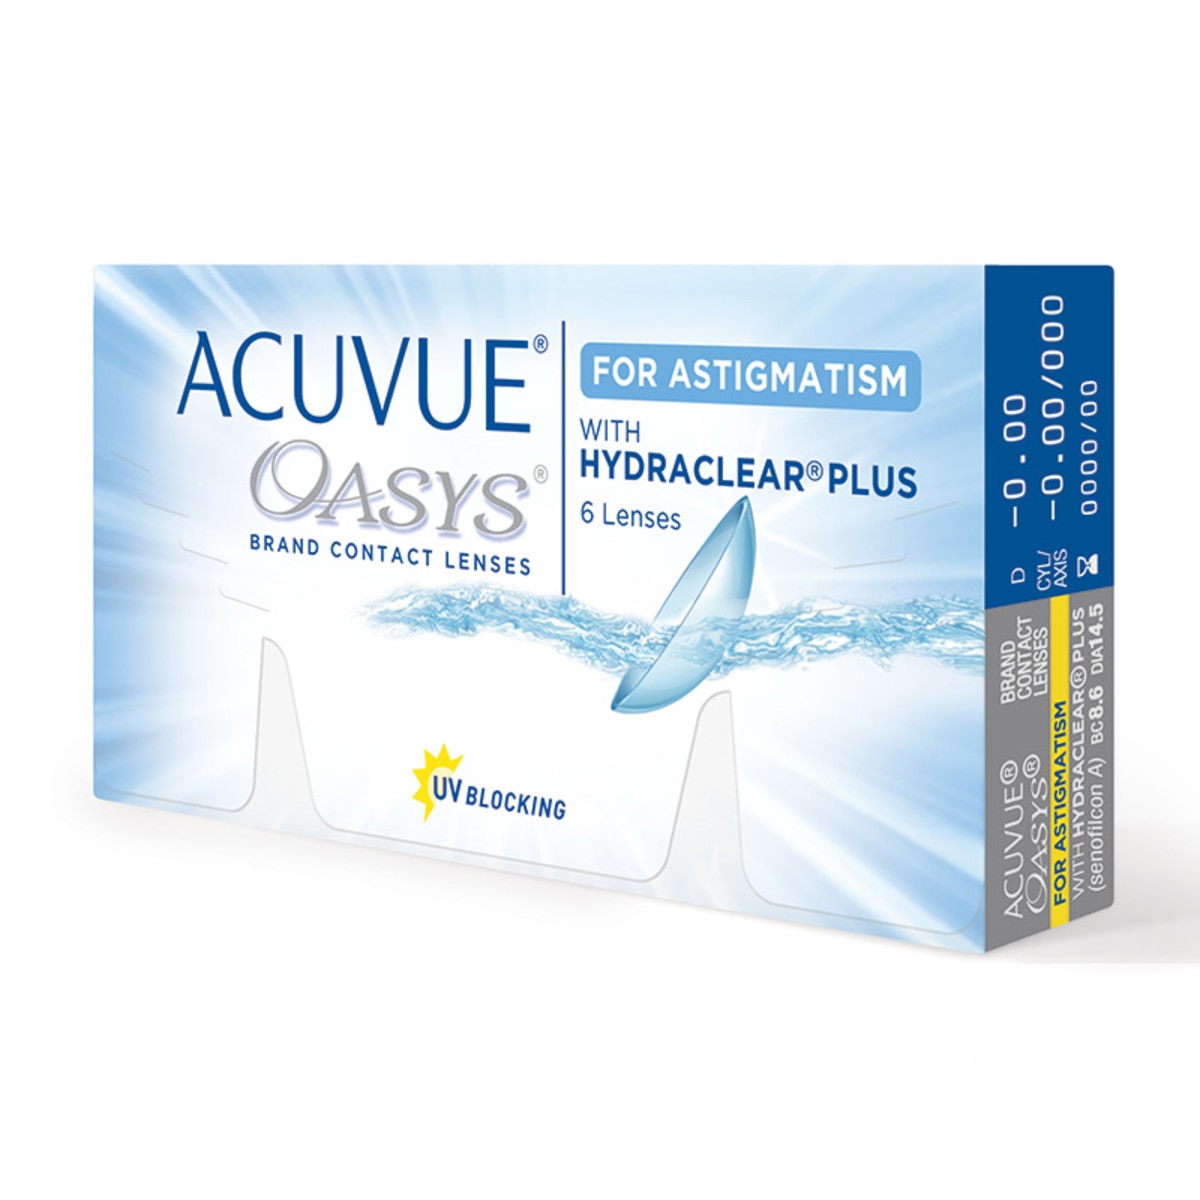 ACUVUE OASYS® con HYDRACLEAR Plus® para Astigmatismo (D 0, Cyl/Axis -0.75/100)